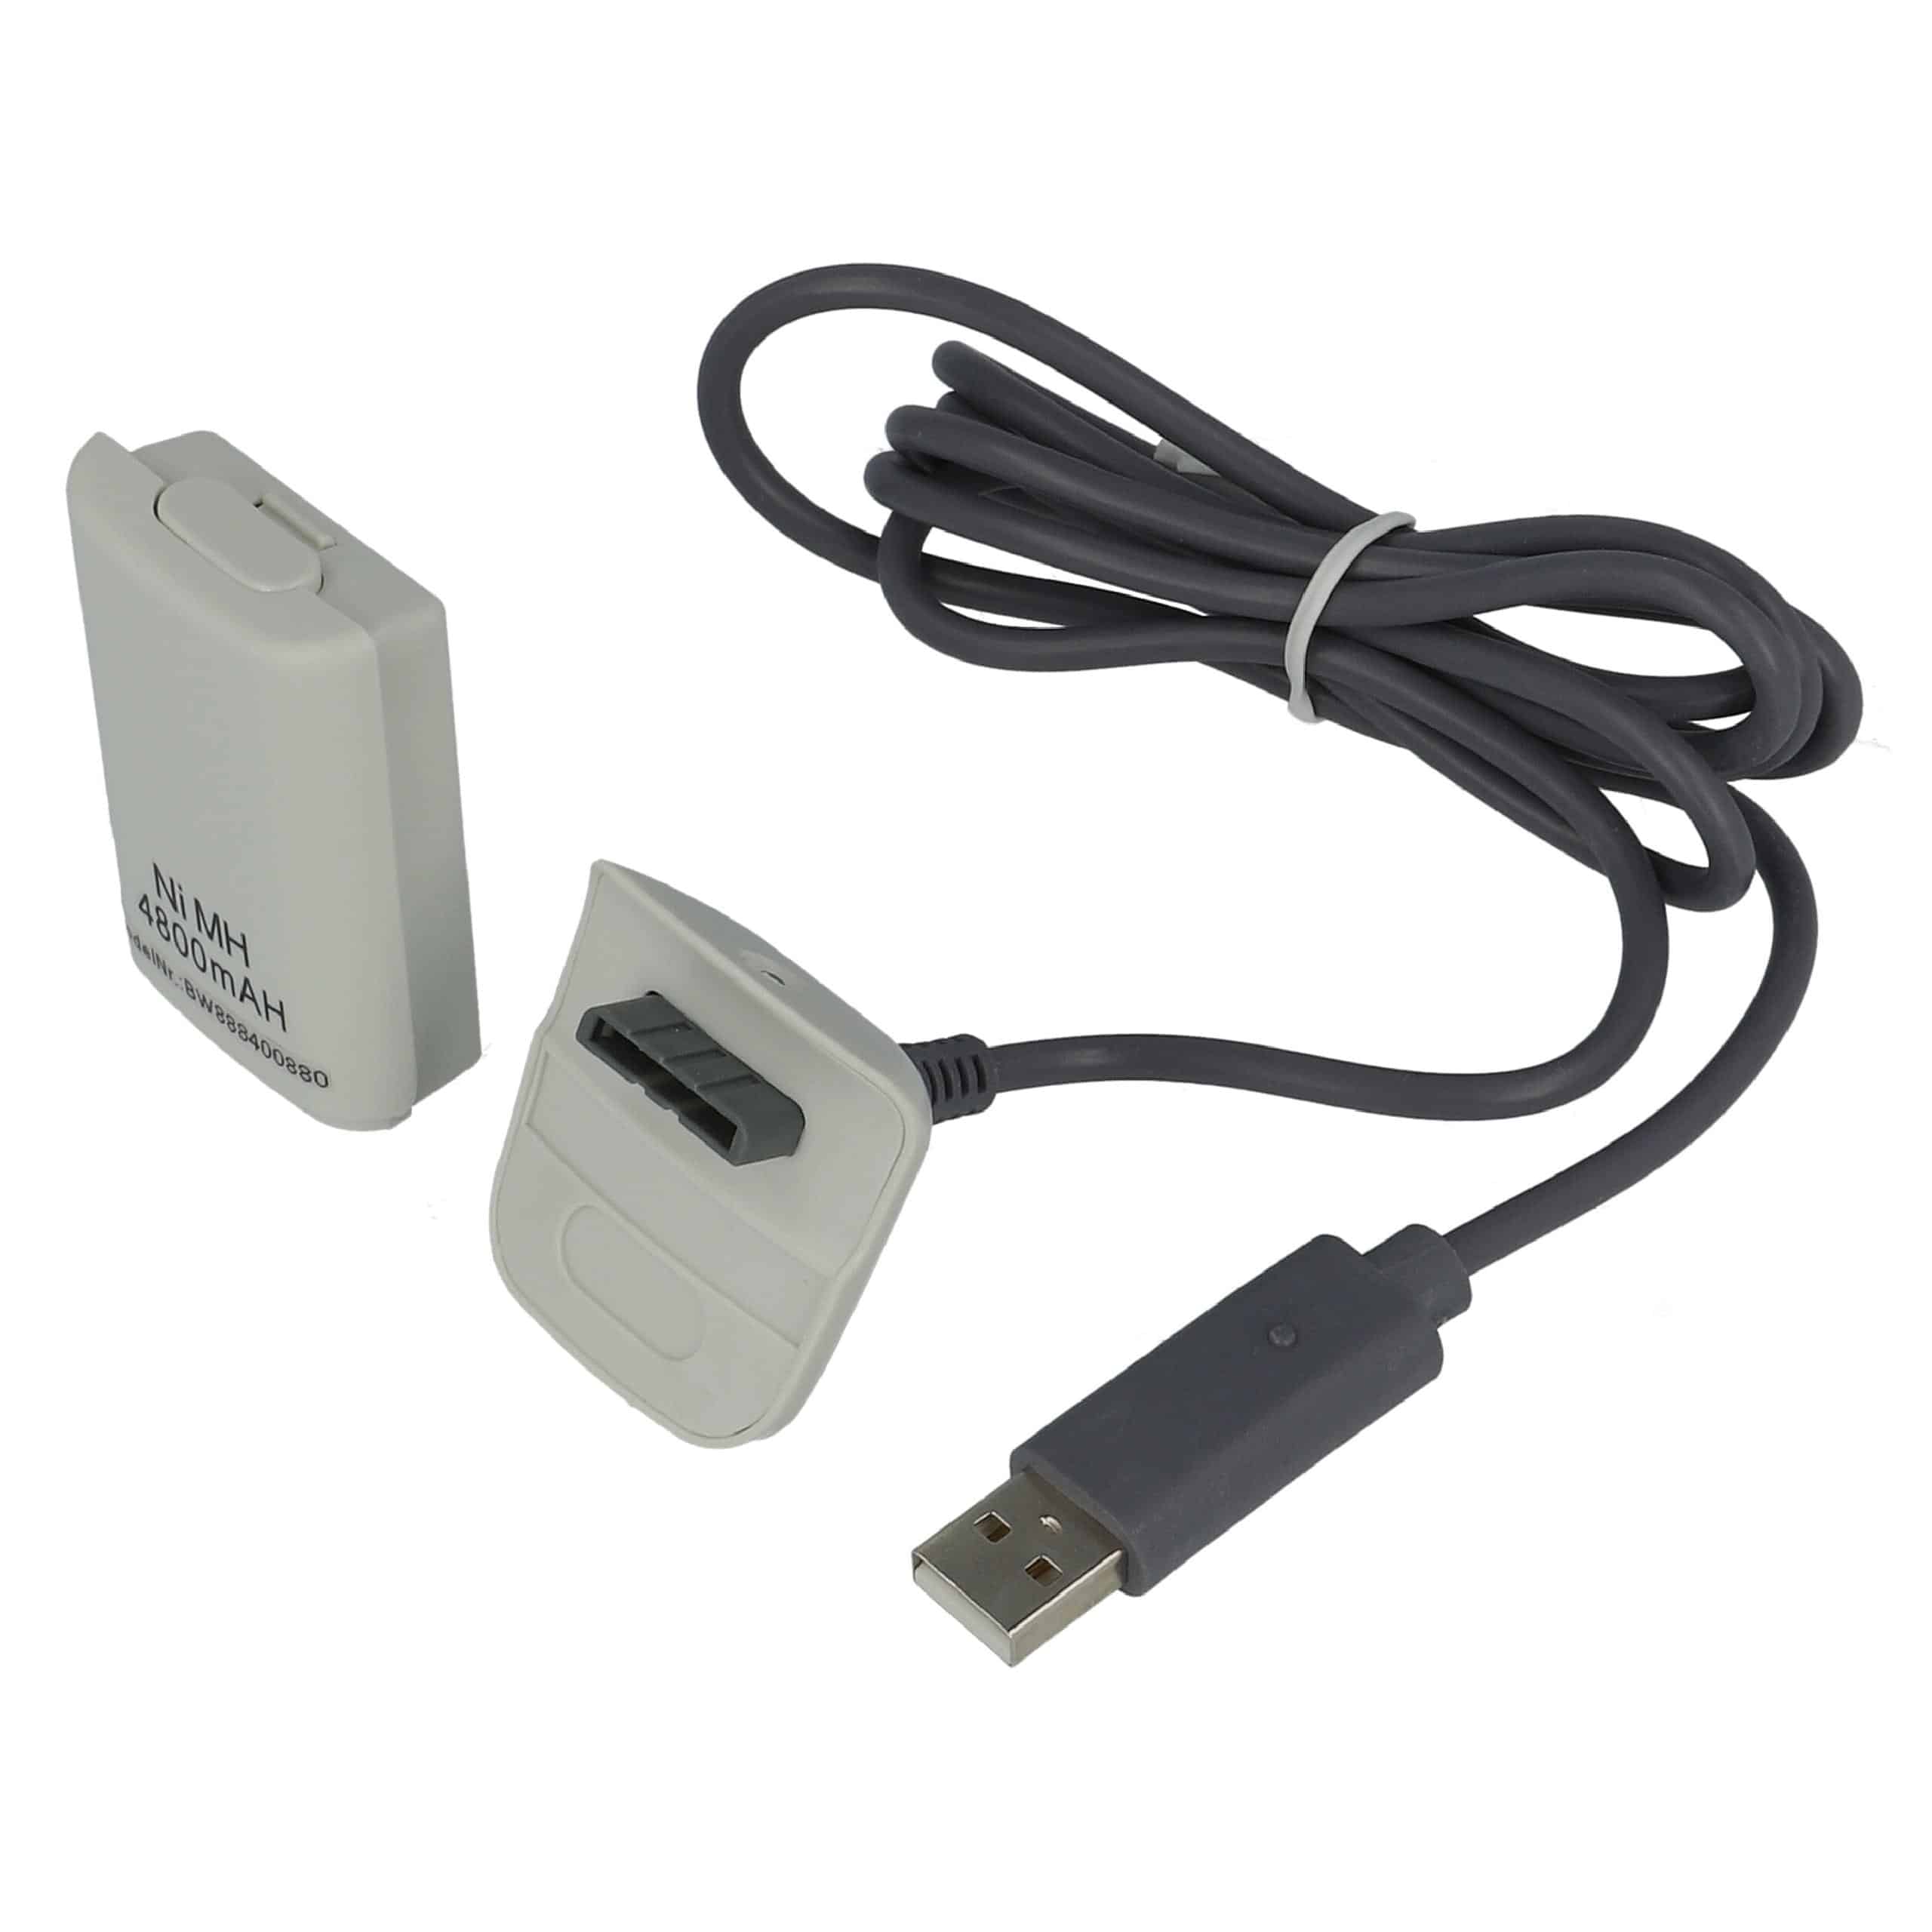 vhbw Play & Charge Kit - 1x charging cable, 1x battery Grey White